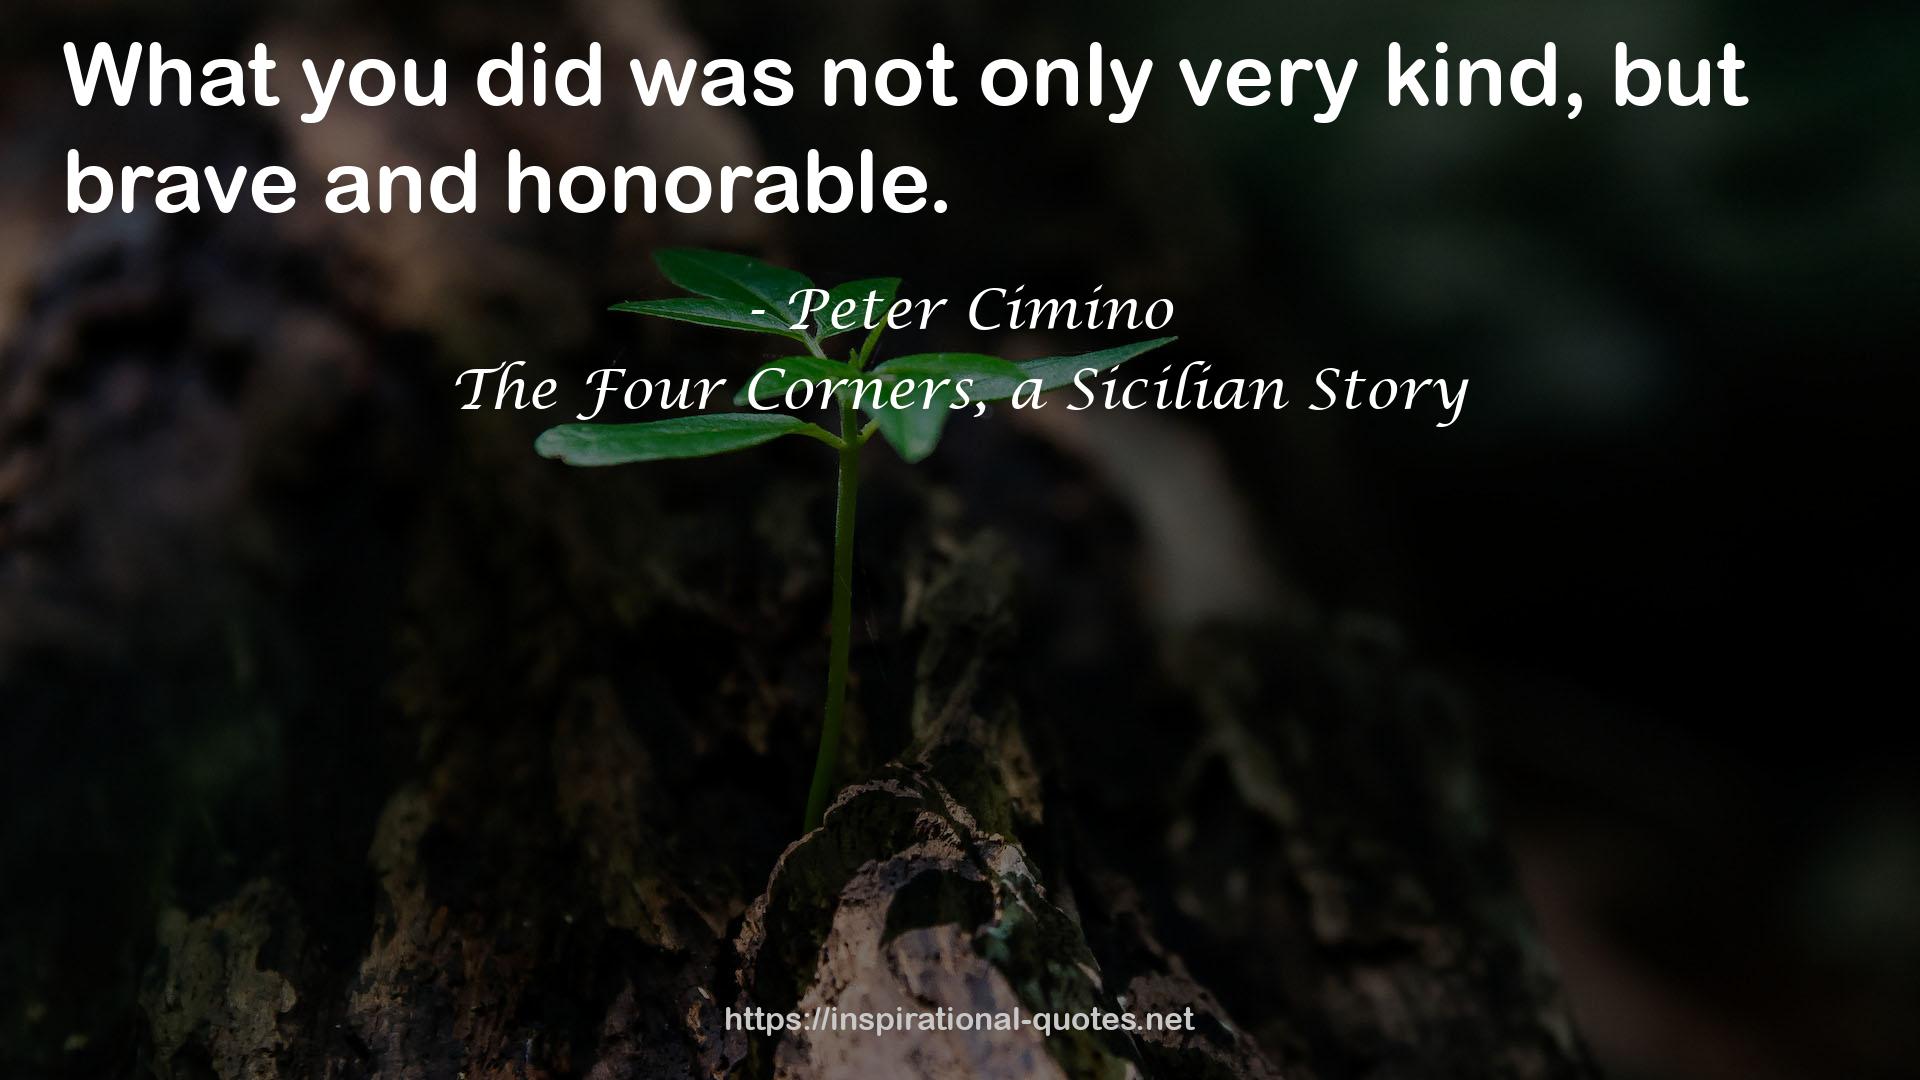 The Four Corners, a Sicilian Story QUOTES